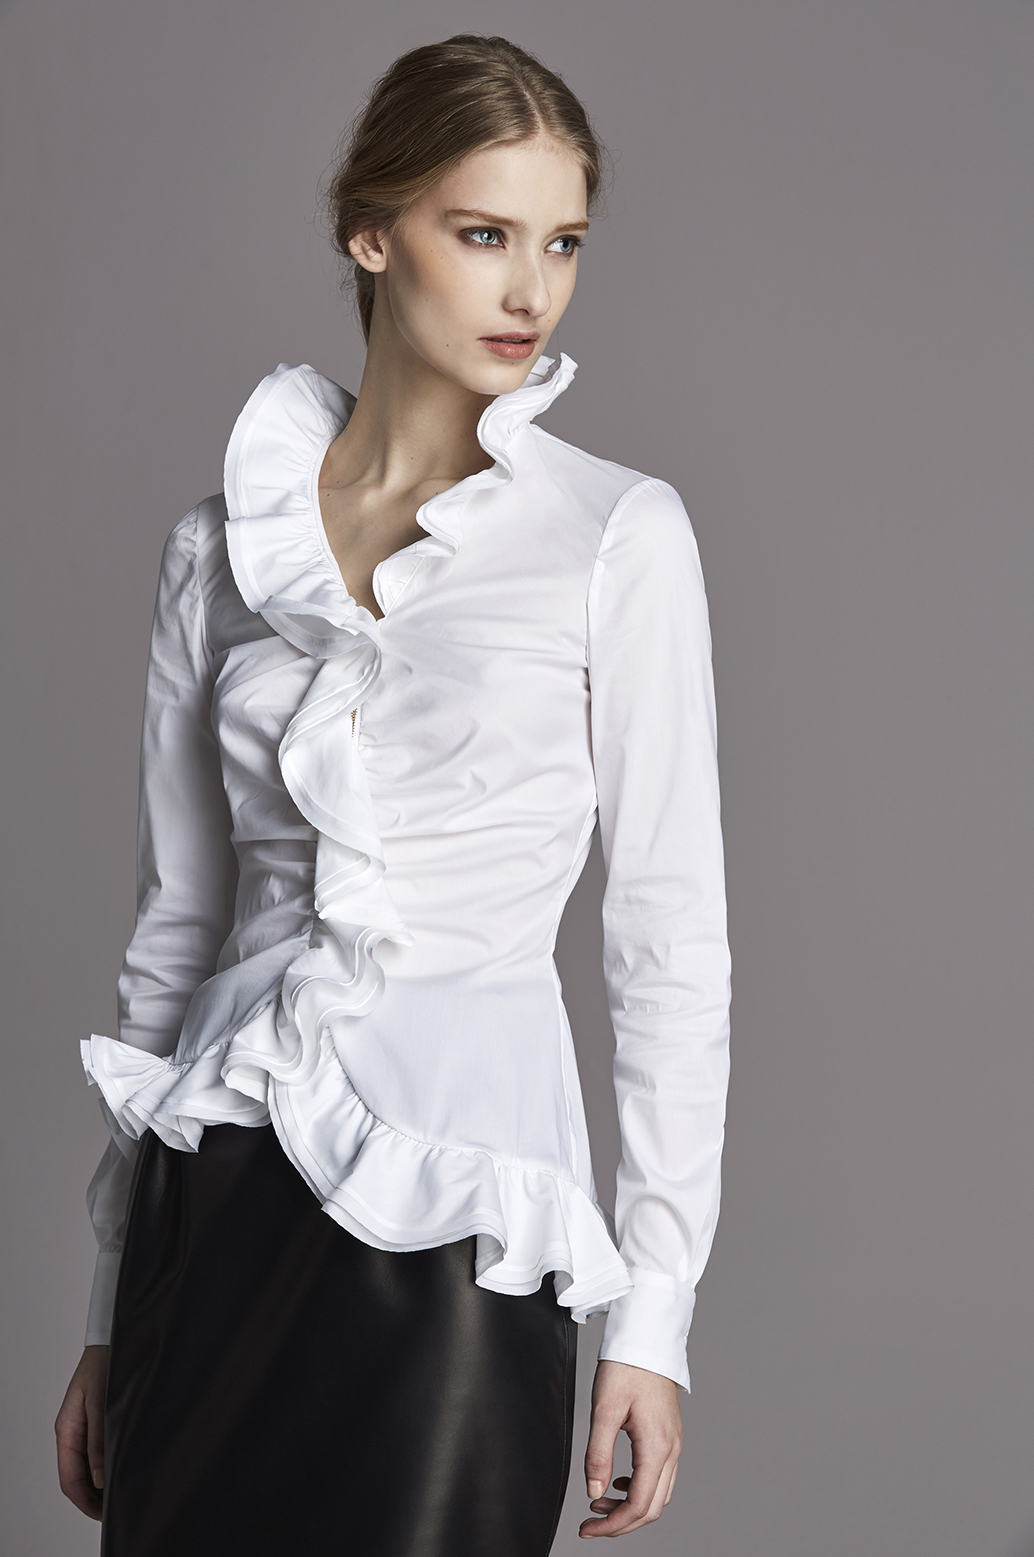 Carolina Herrera Introduces White Shirt ONLY Collection